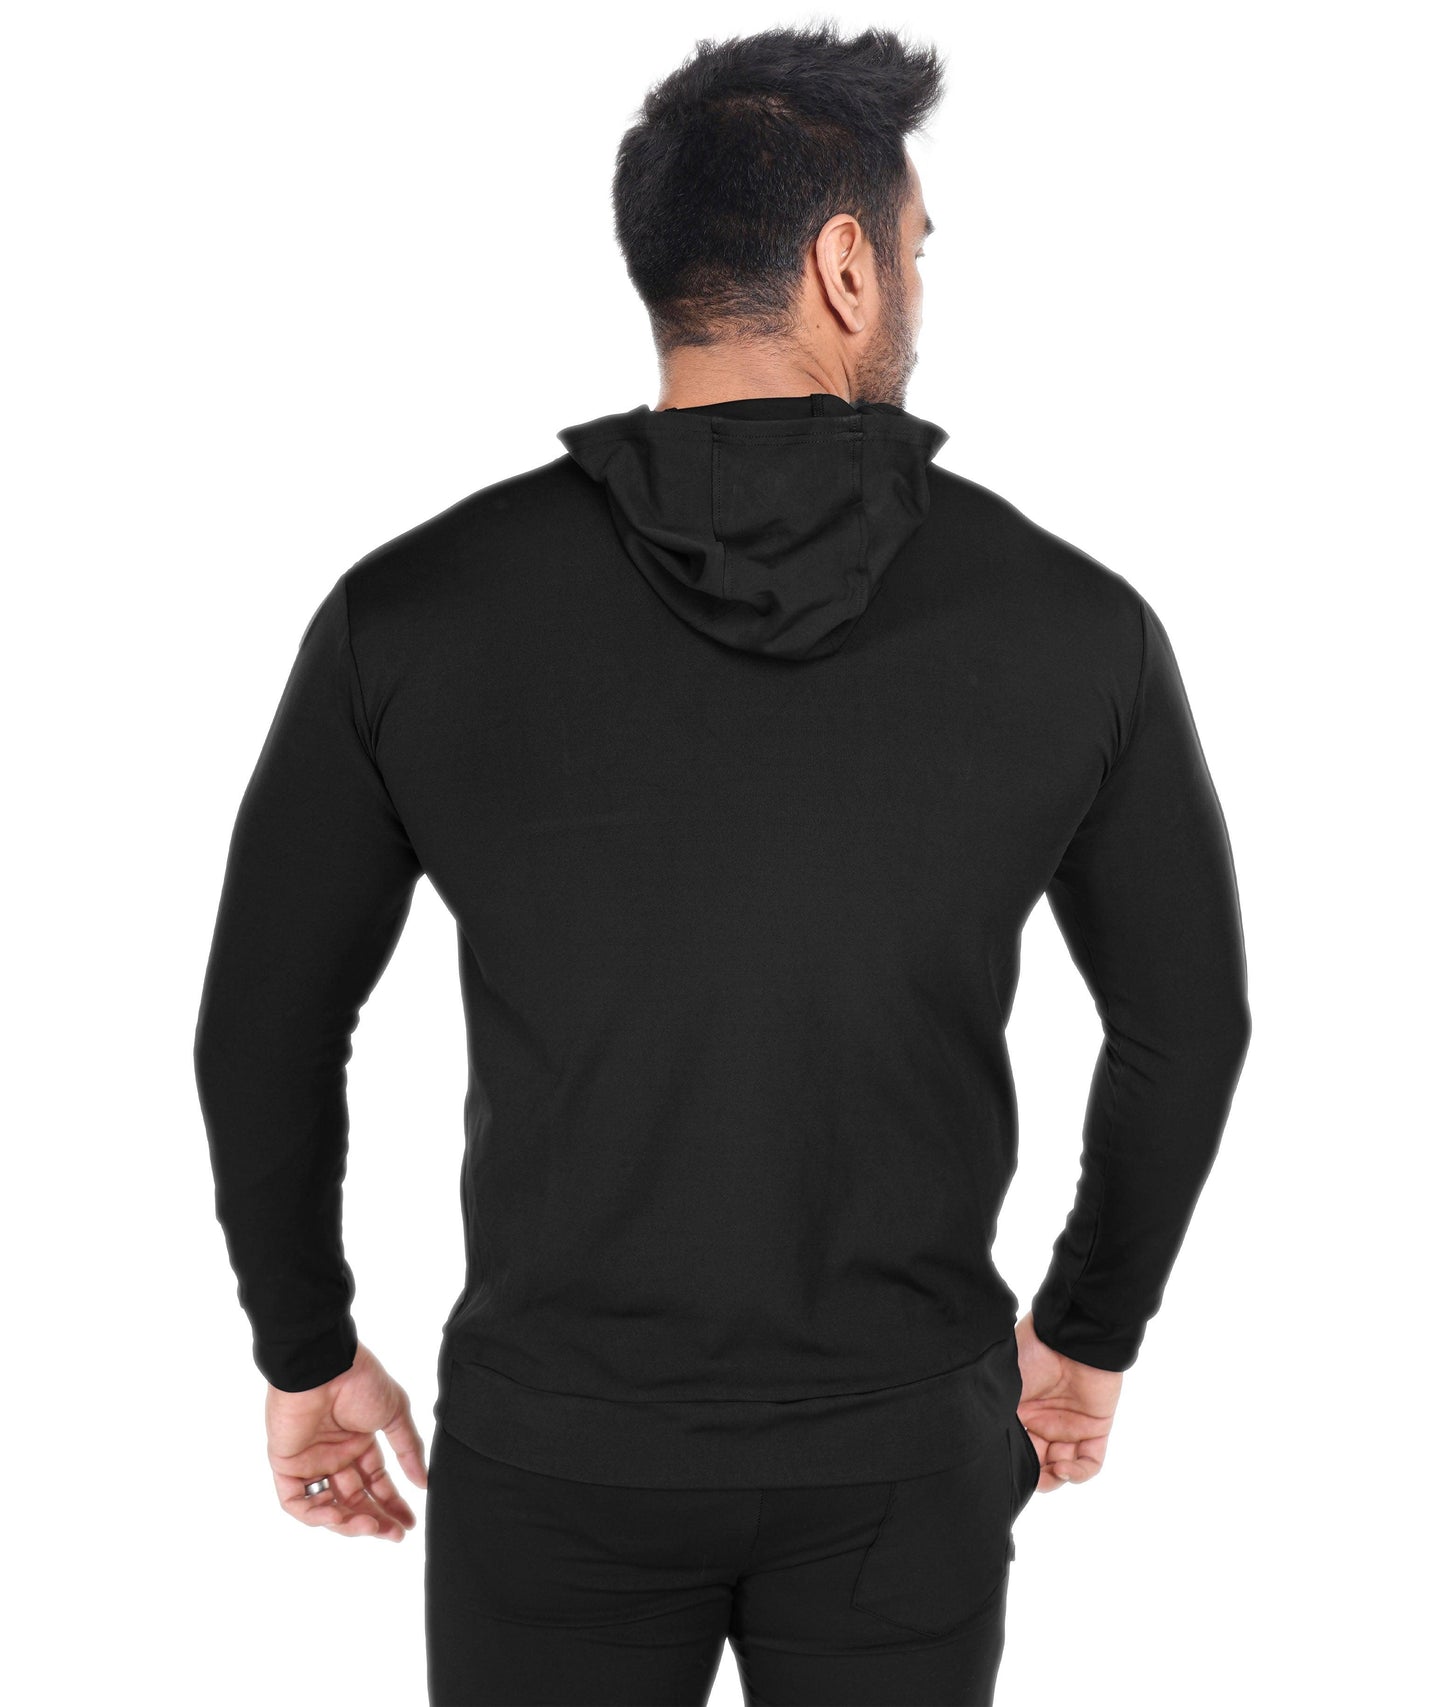 Dual Edition GymX Pullover: Lush Green-Sale